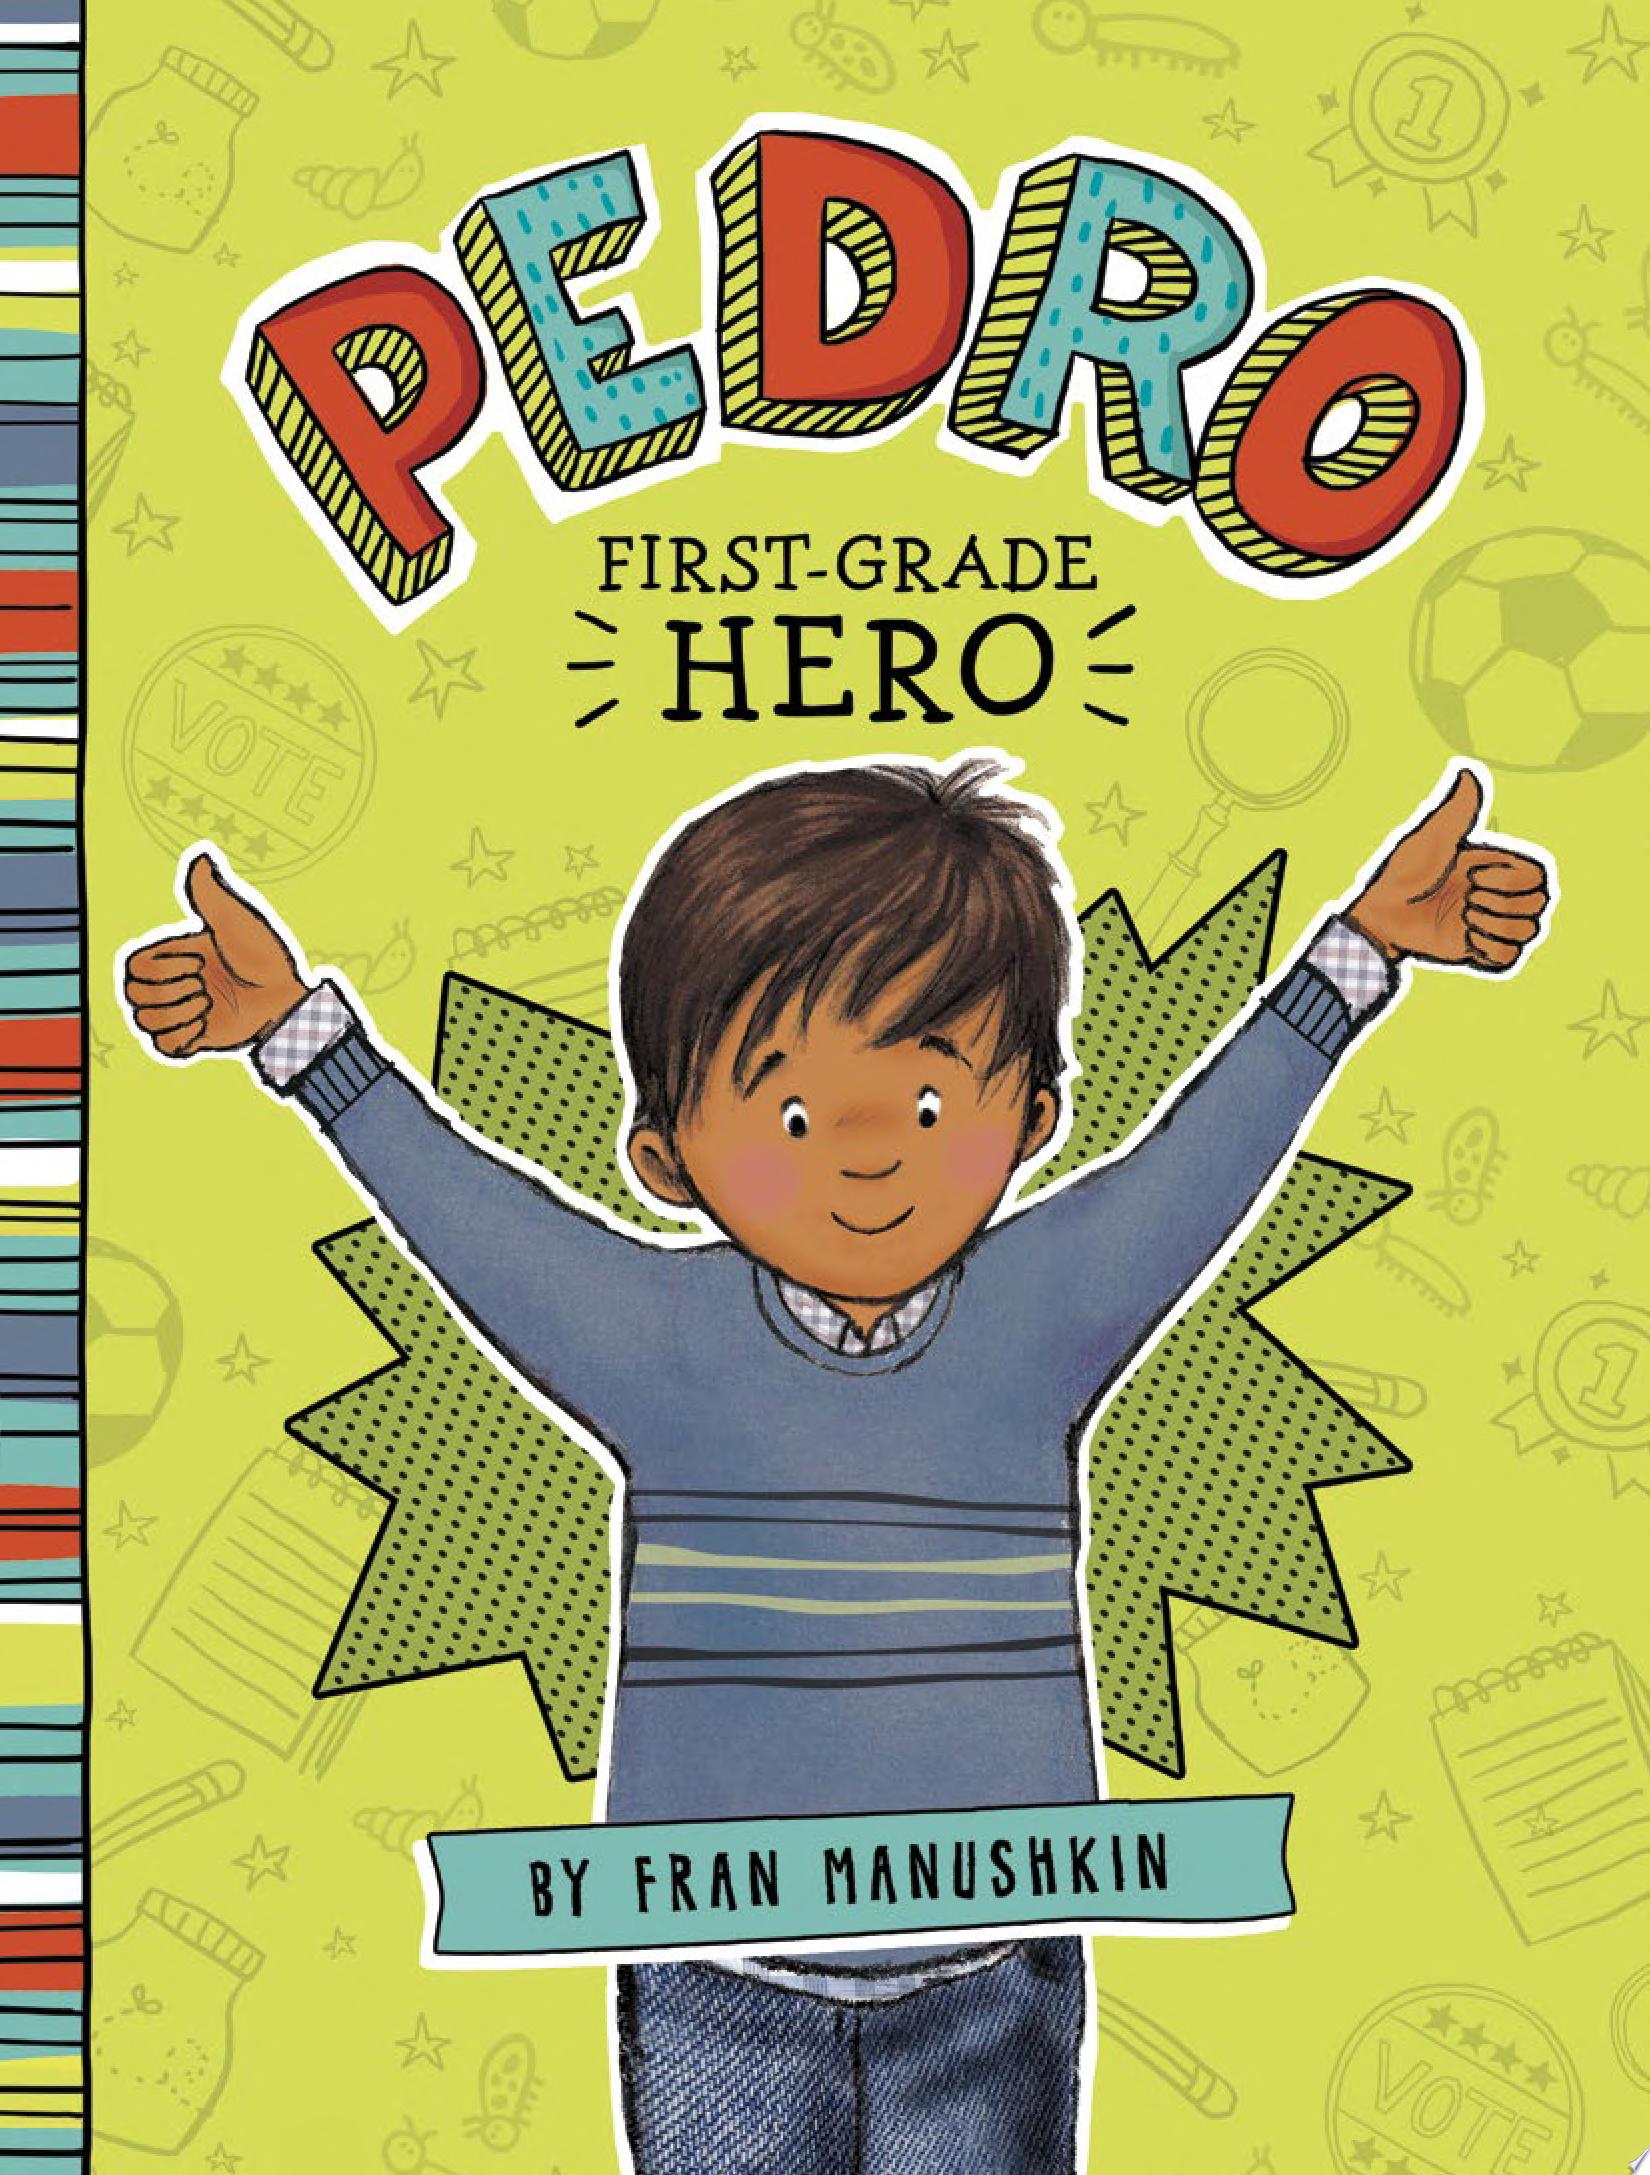 Image for "Pedro, First-Grade Hero"